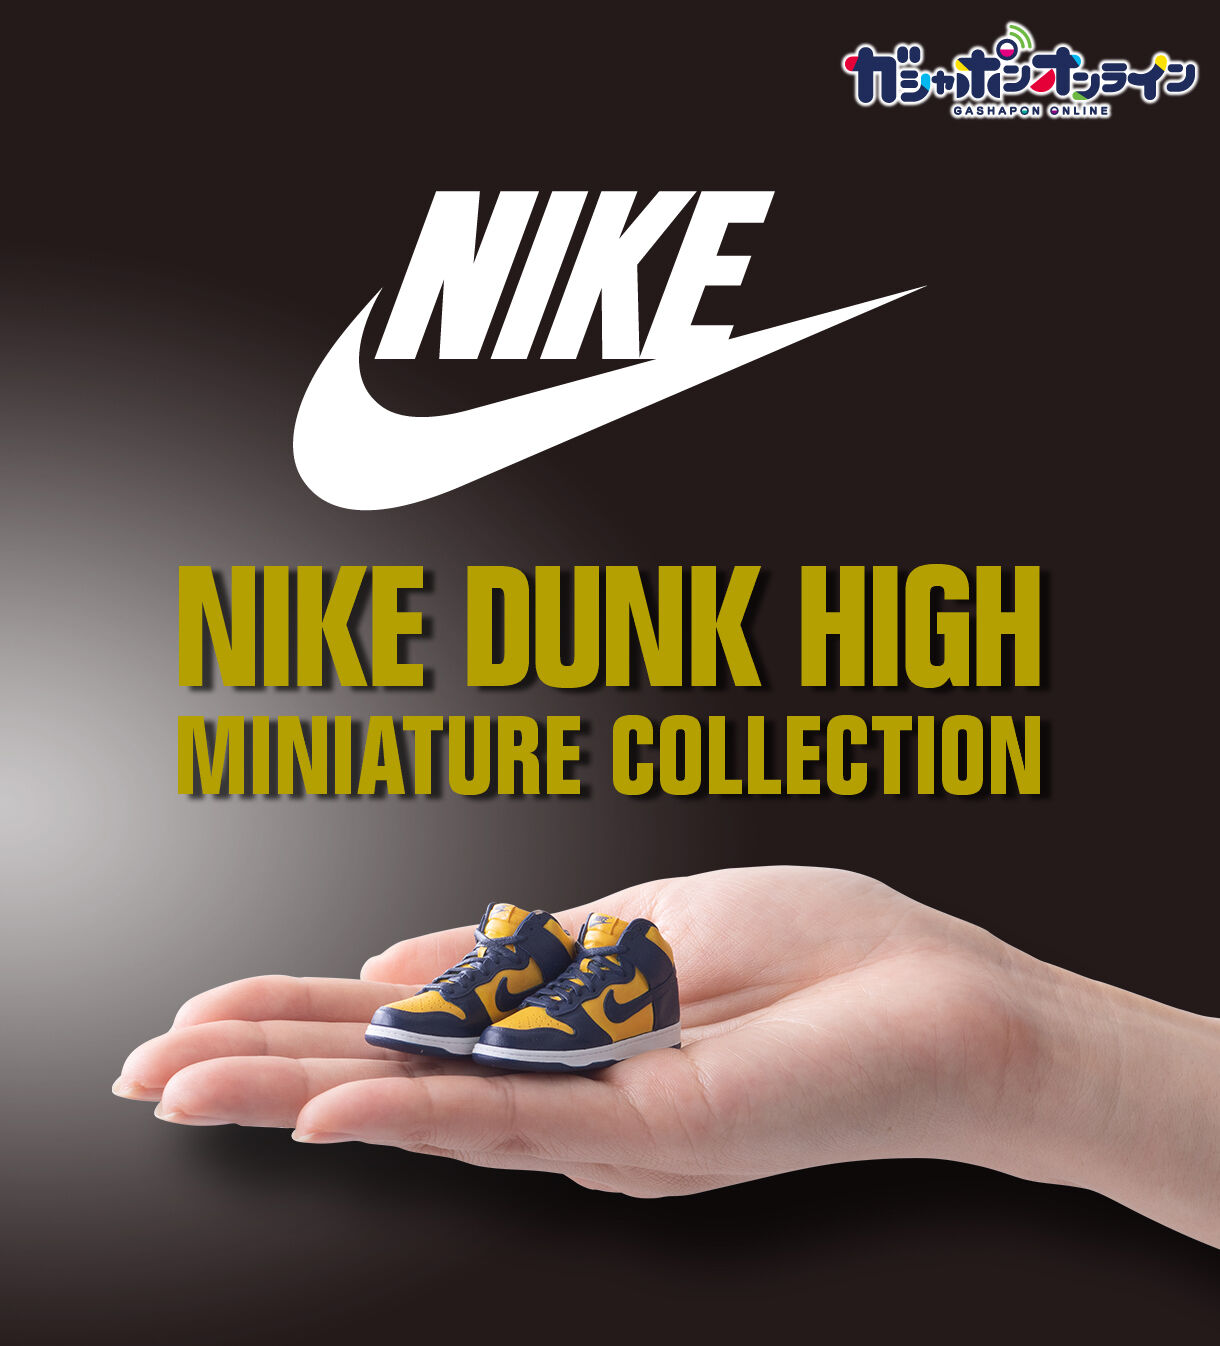 NIKE DUNK HIGH miniature collection